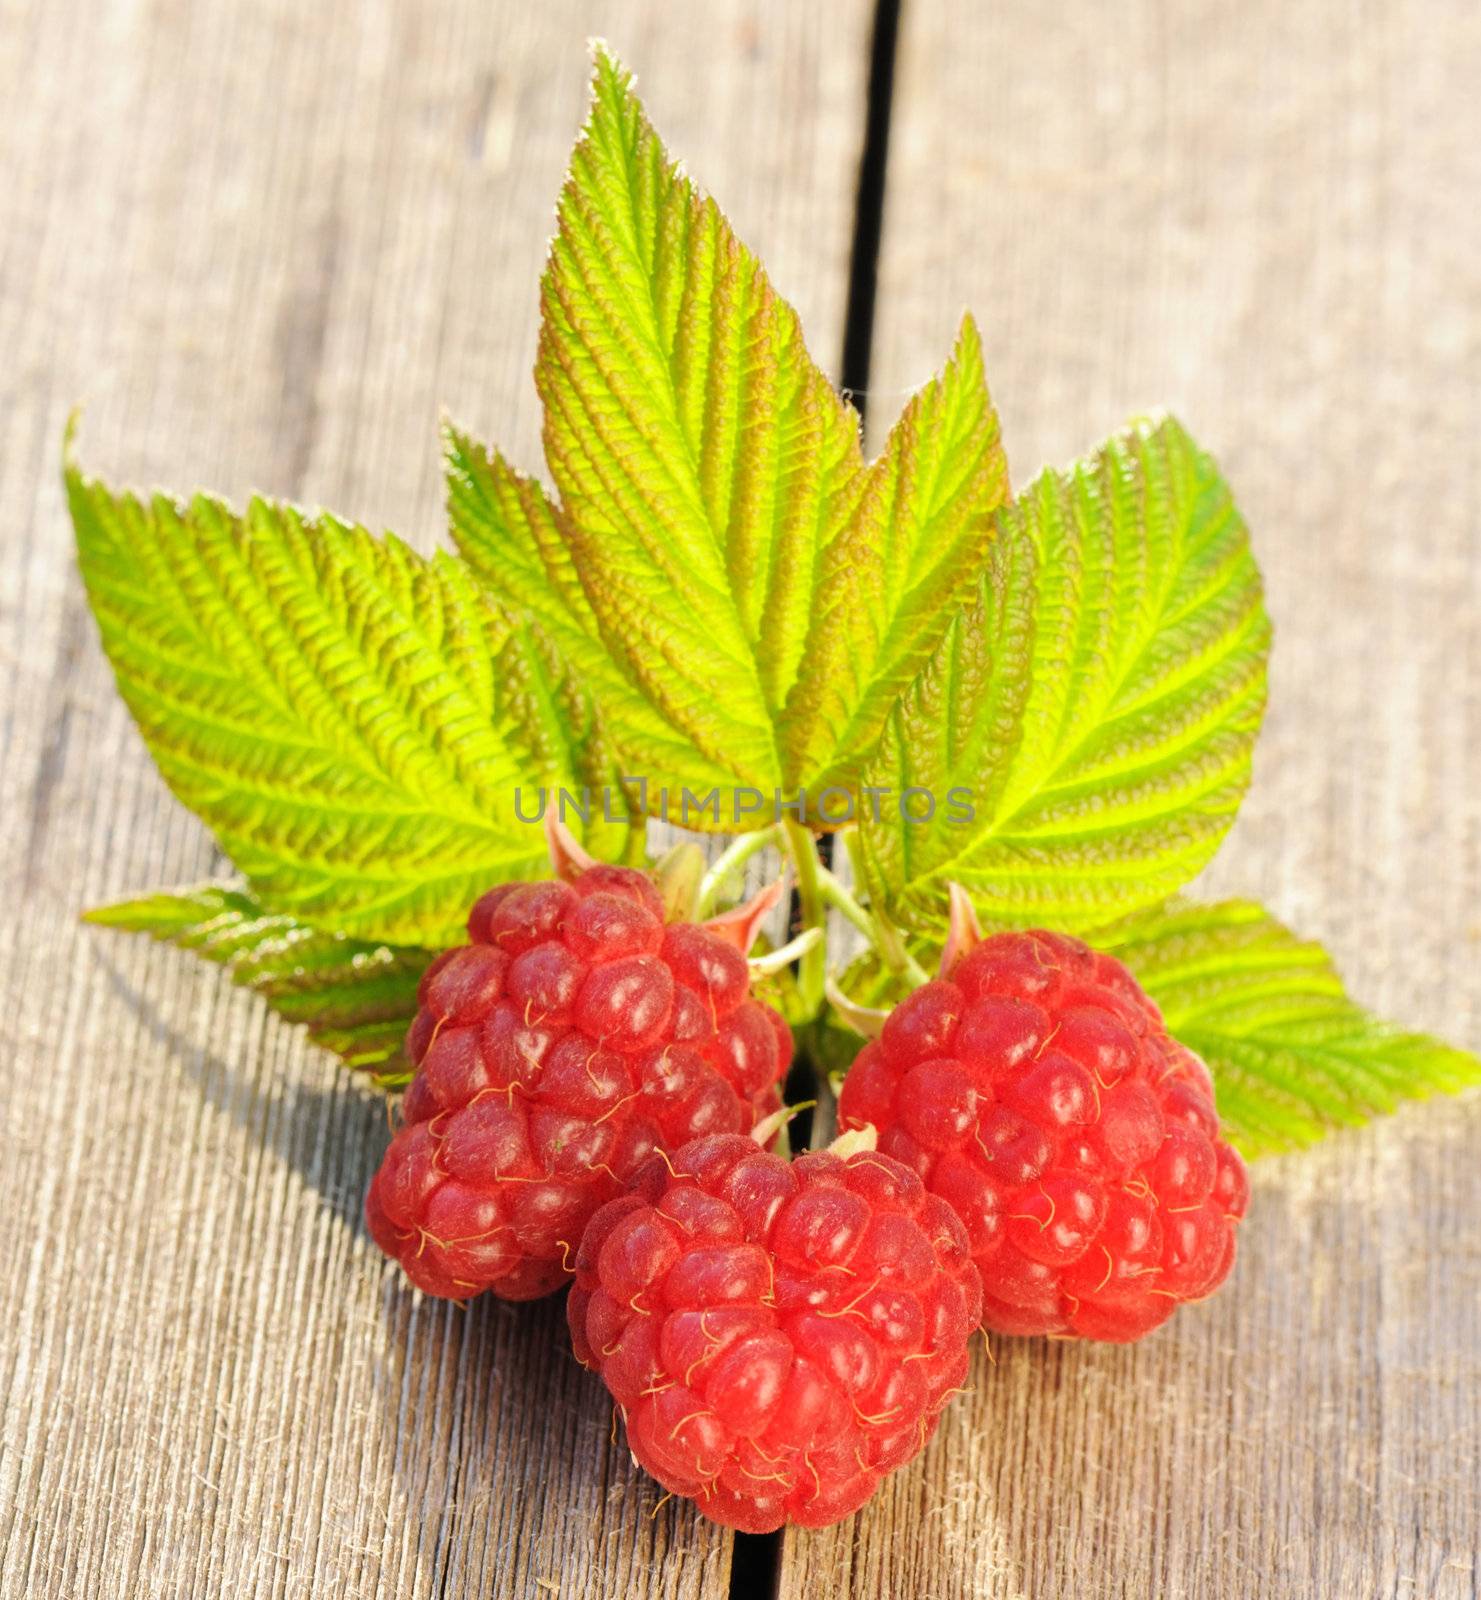 Raspberry on wooden table by haveseen